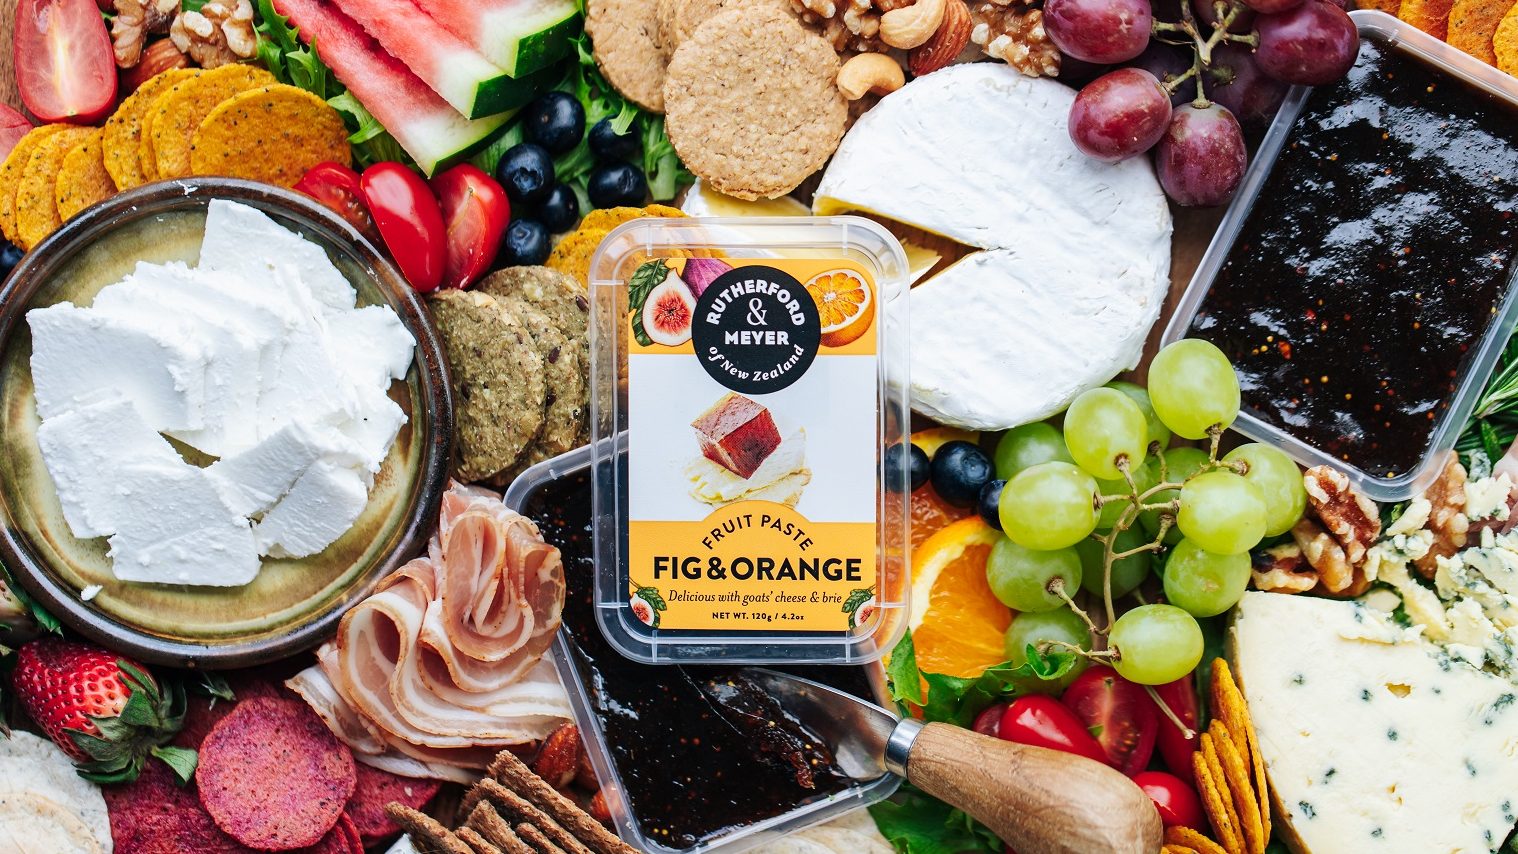 Best of summer with Fig & orange paste on a grazing platter